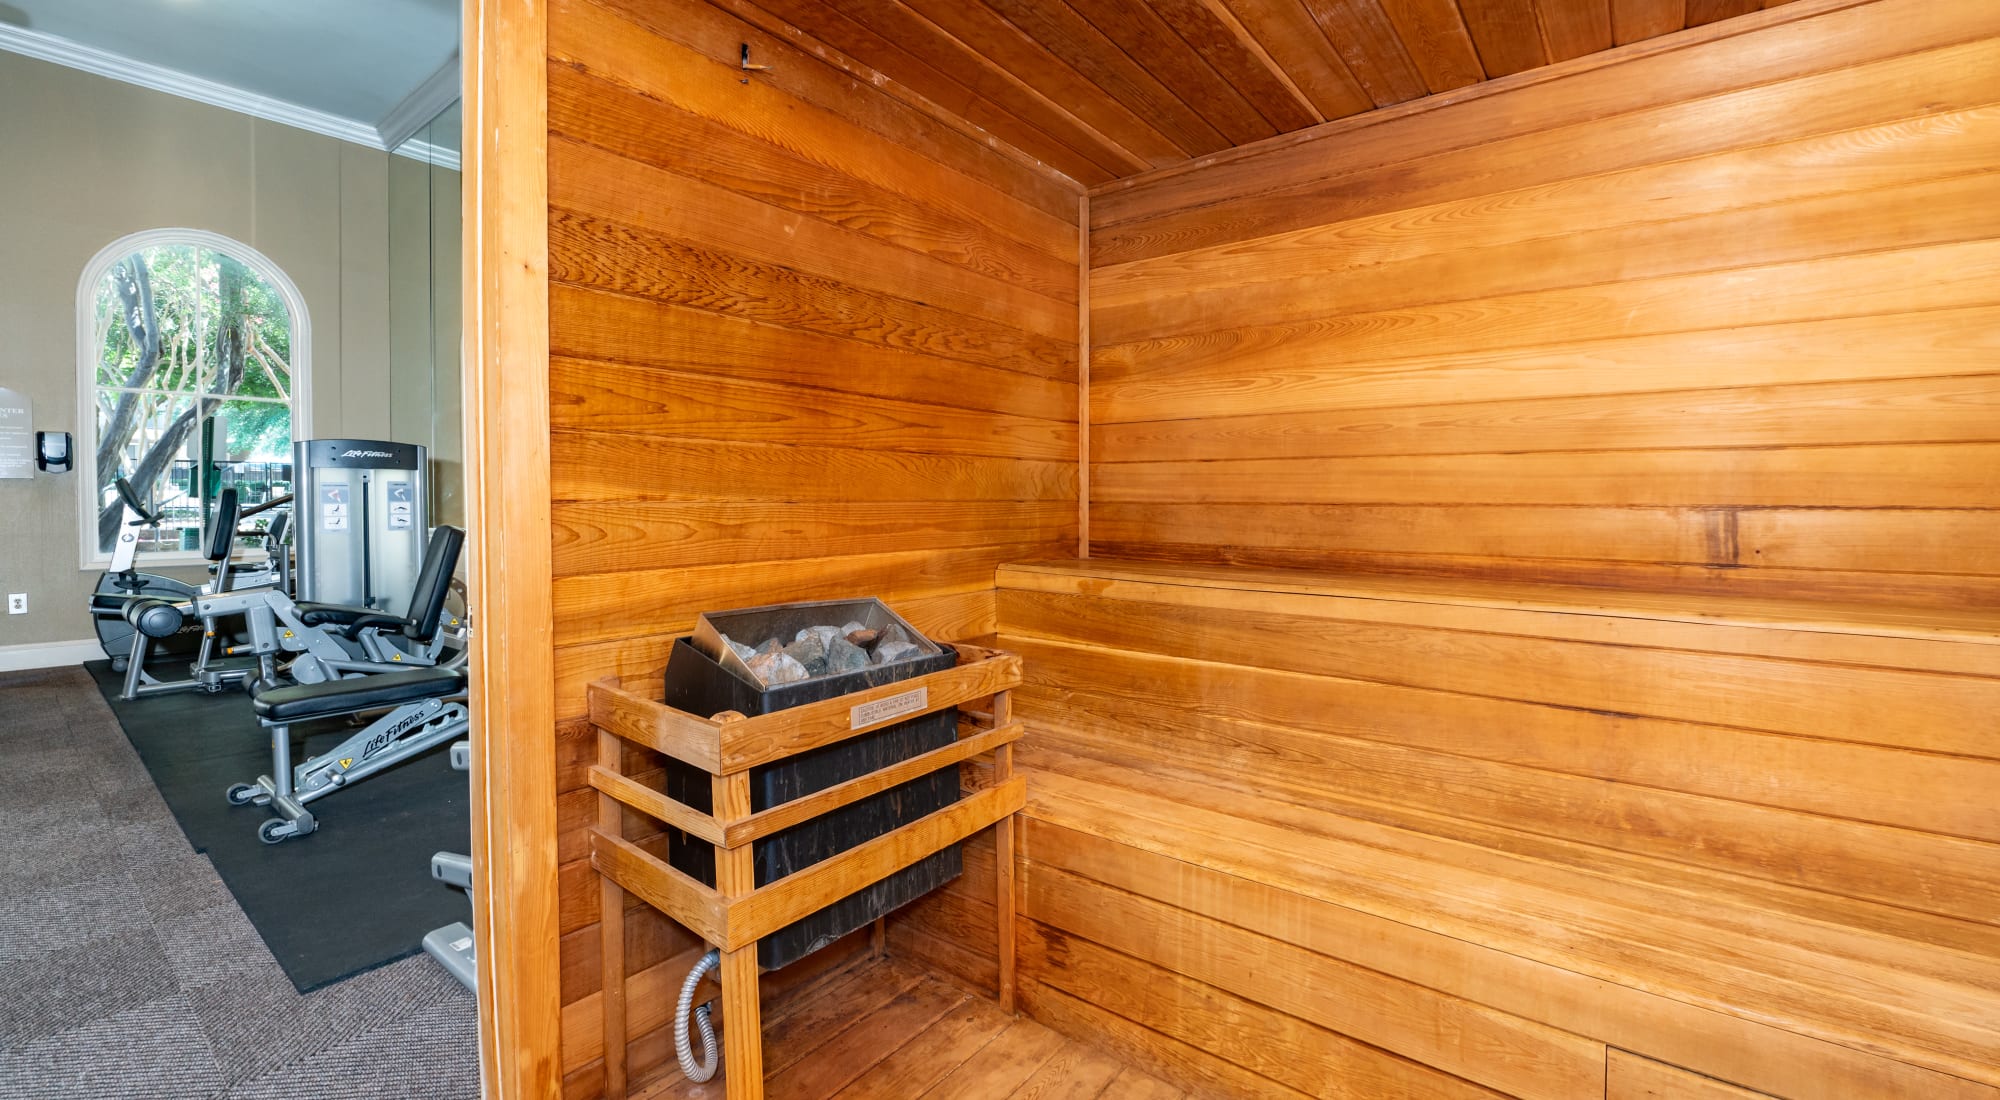 Sauna with view of fitness center at Briargrove at Vail